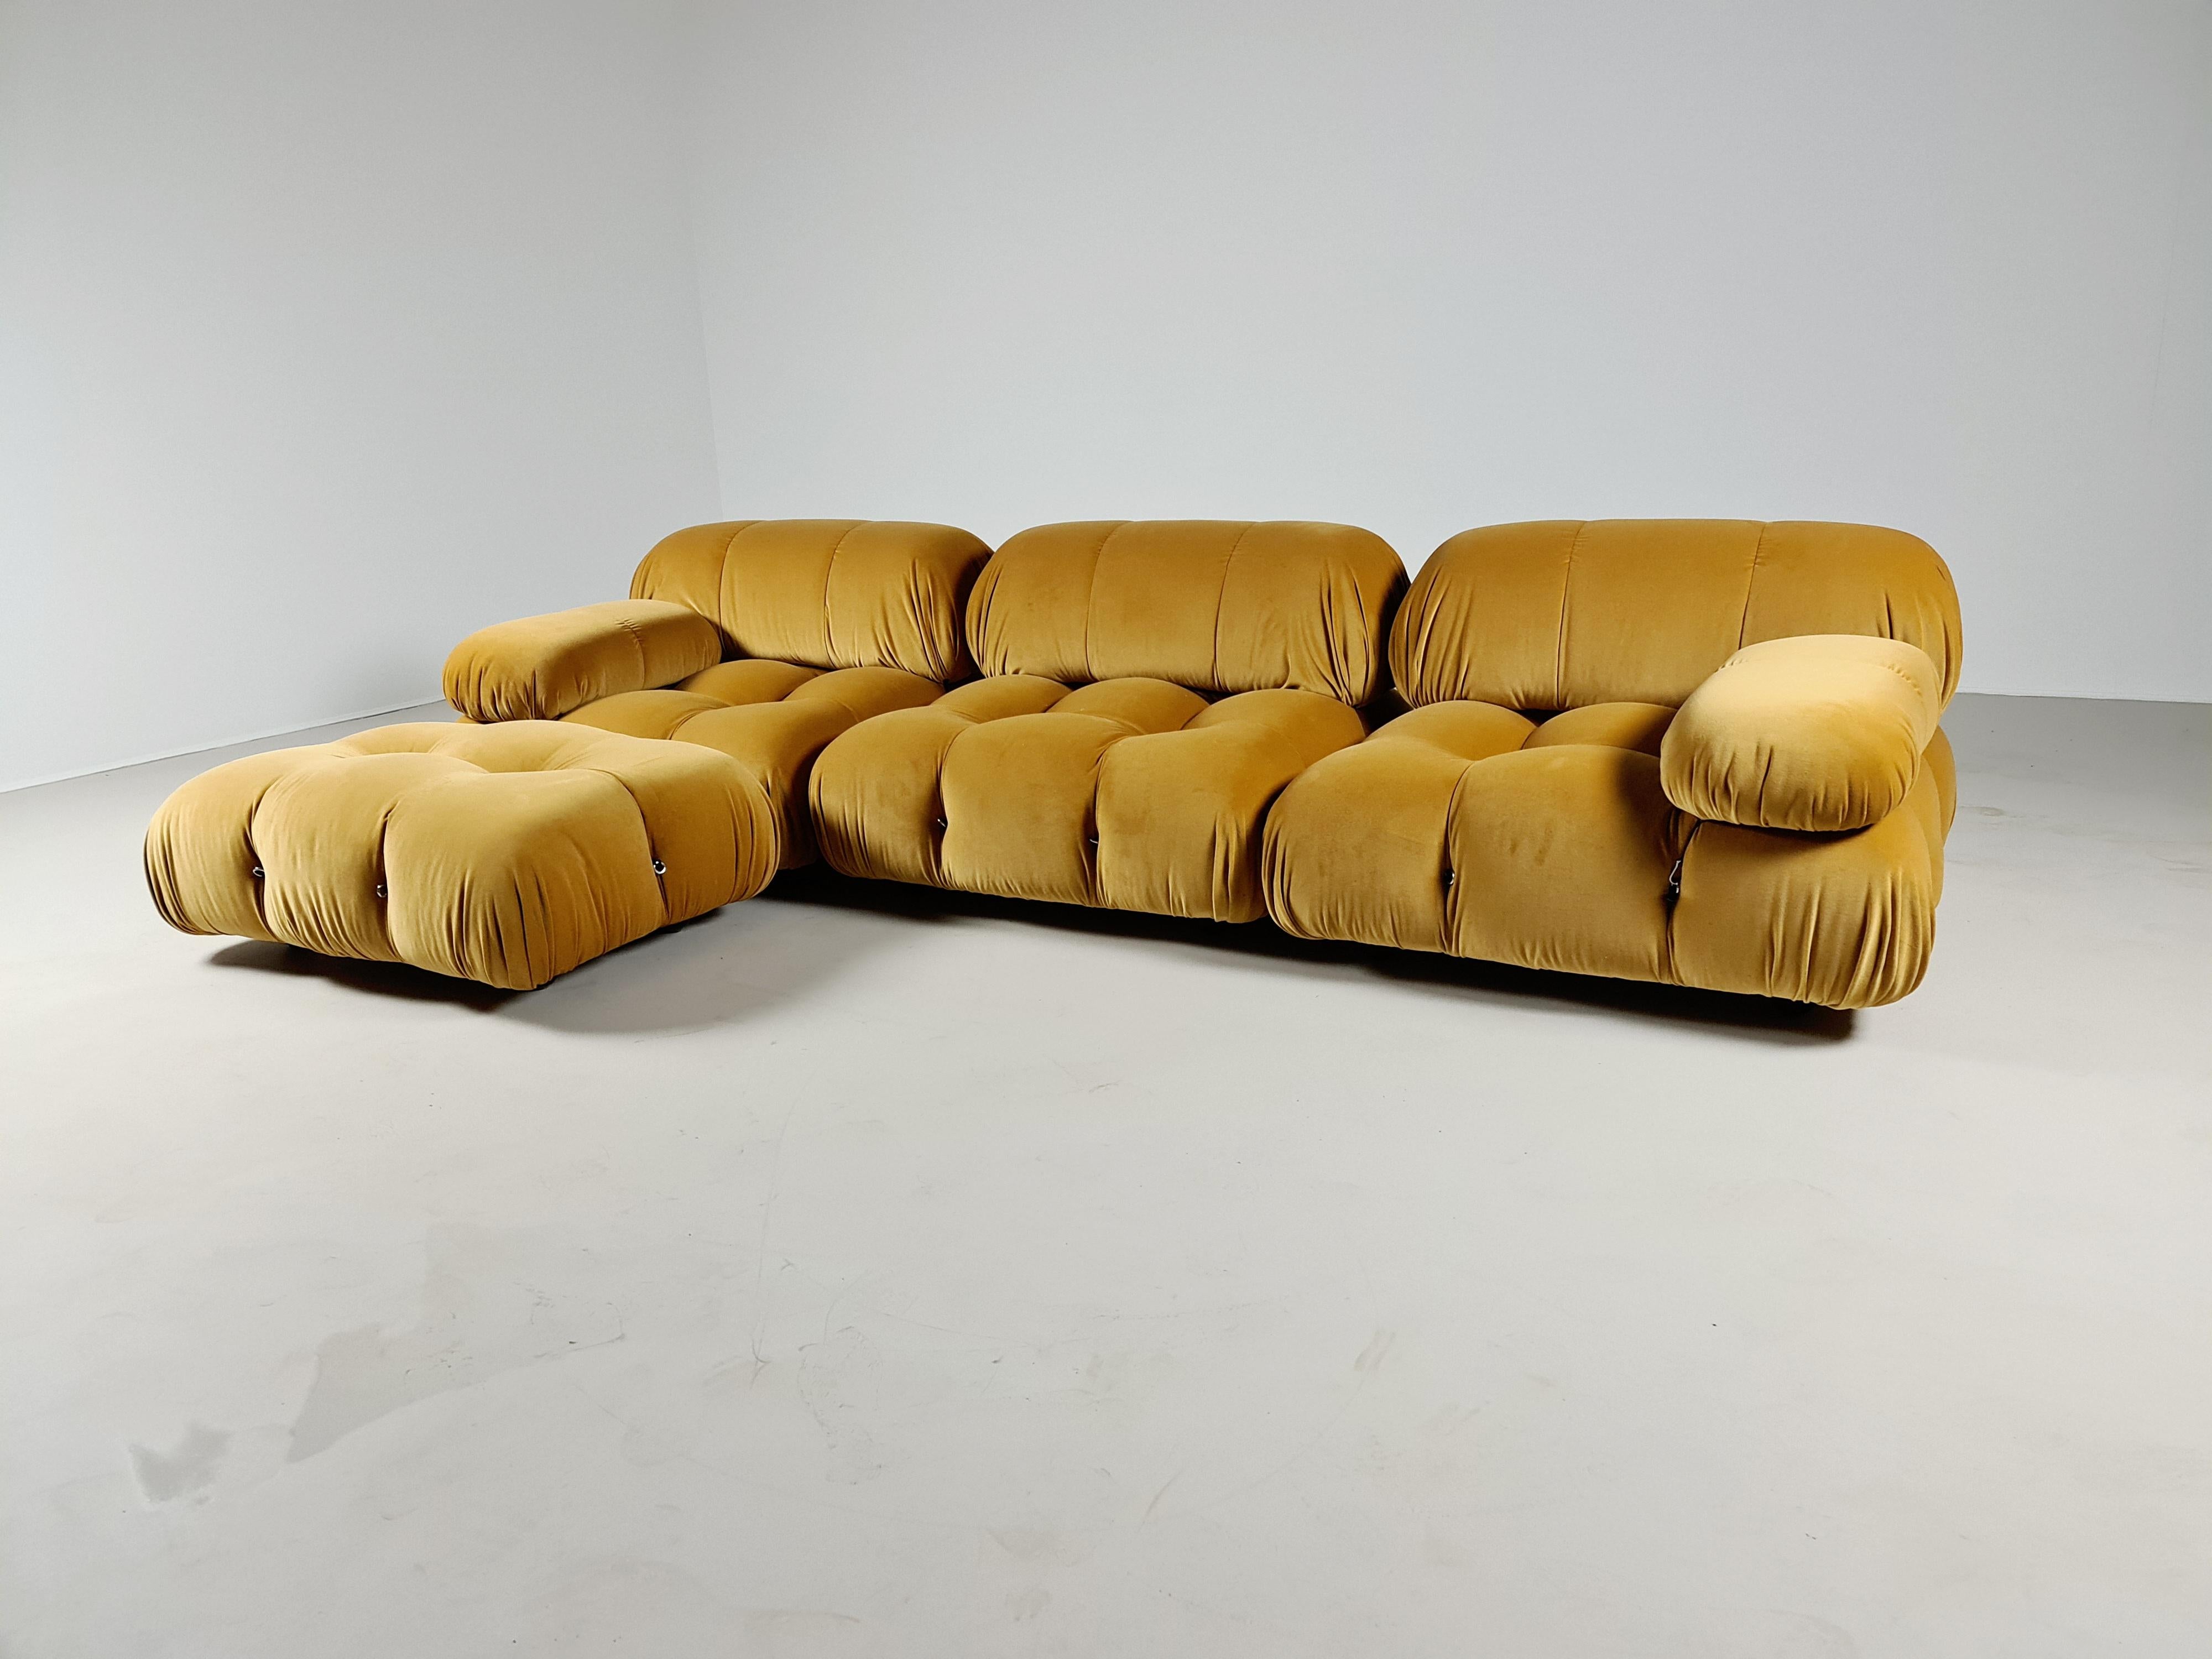 A stunning 4-piece modular Camaleonda sofa designed by Mario Bellini for C&B Italia. So early edition. Beautiful Italian design piece from the early 1970s. You can configure as you wish. Reupholstered in beautiful golden cotton velvet from Pierre